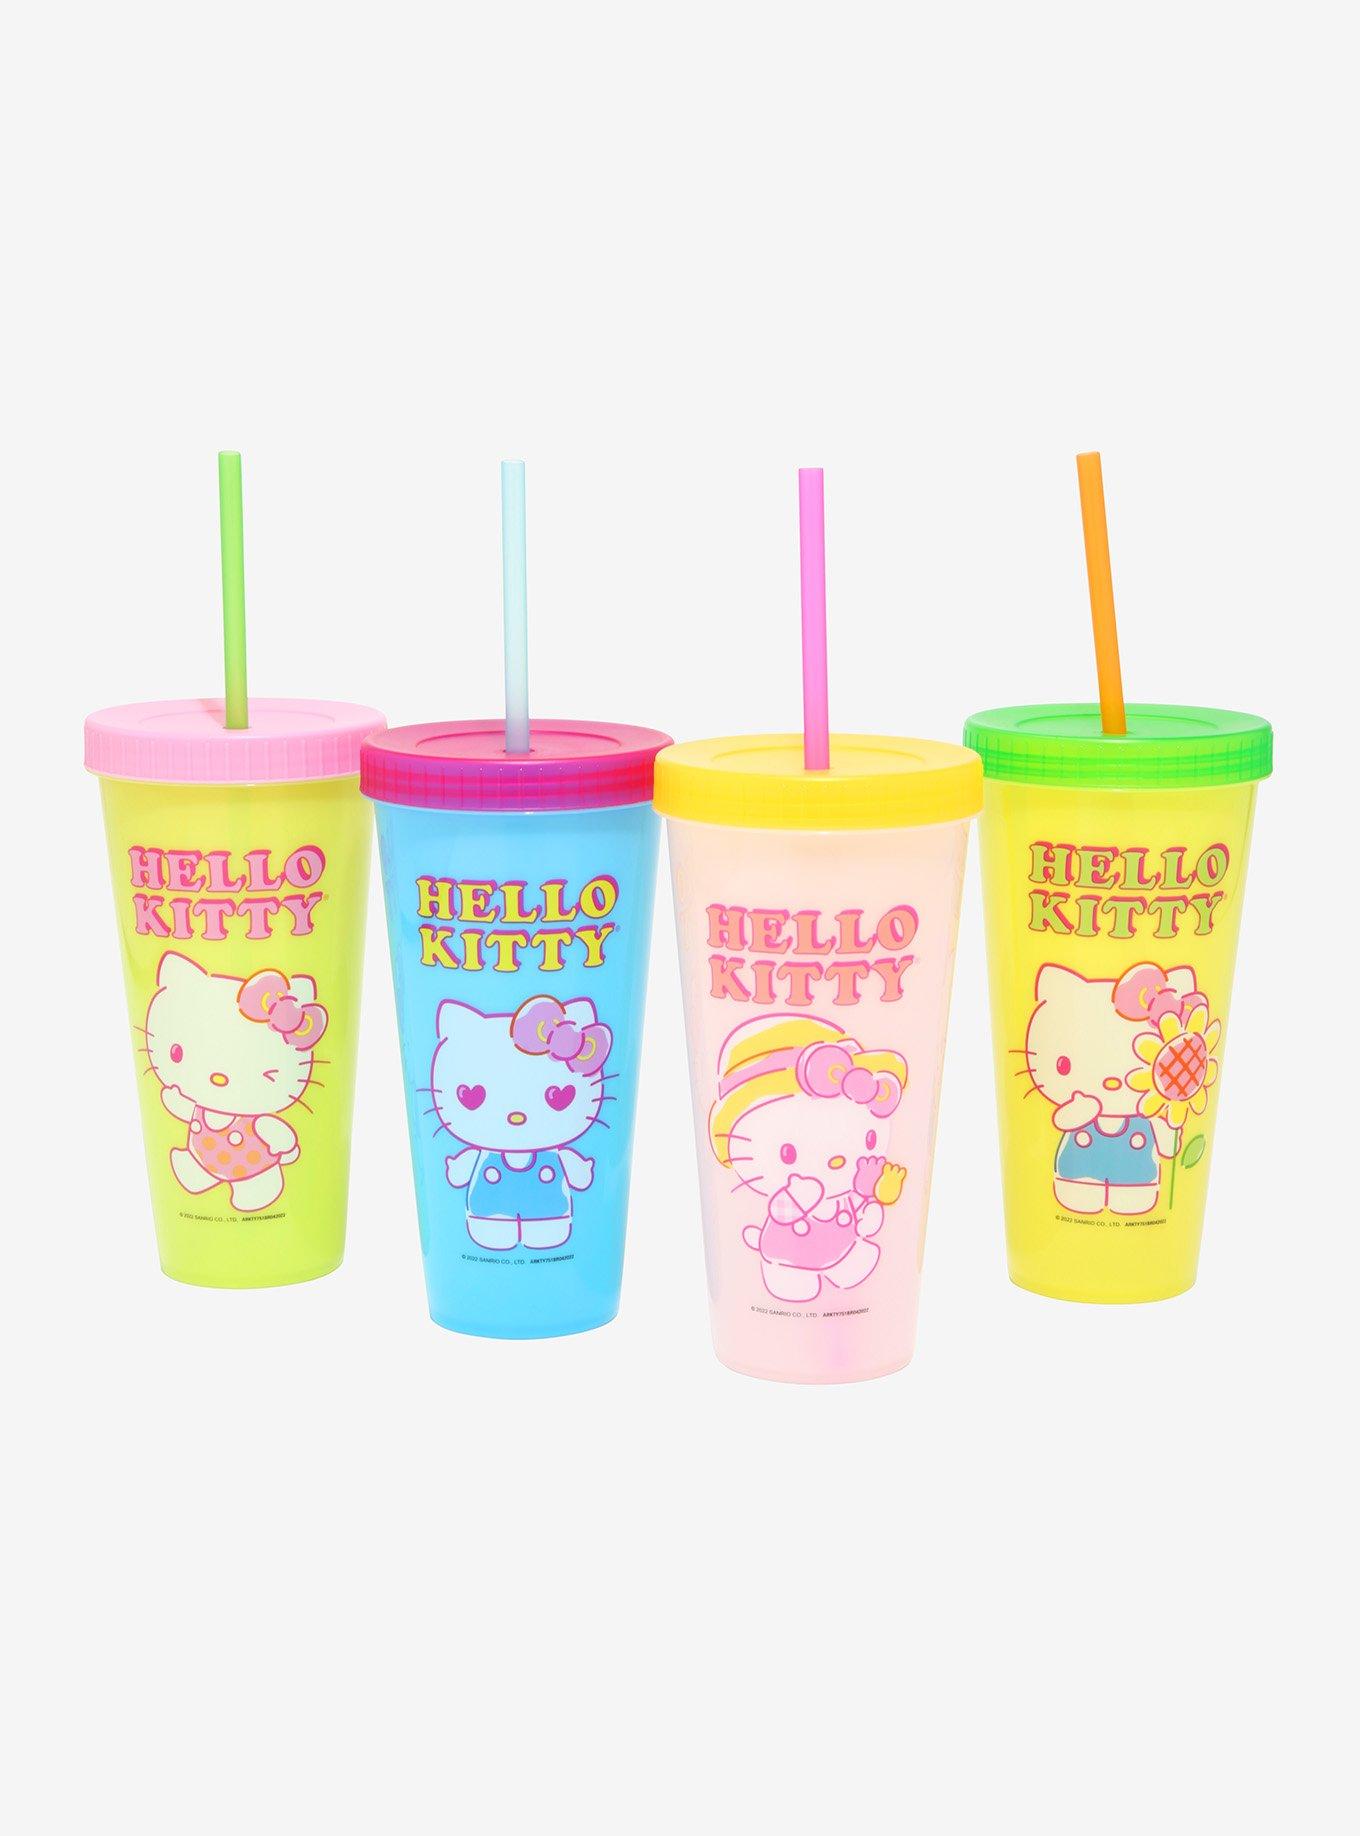 Hello kitty if you want your please send me a DM #hellokitty #lv  #colorchangingcup #colorchangingcups #peachcolorchangingcup #louisvuitton